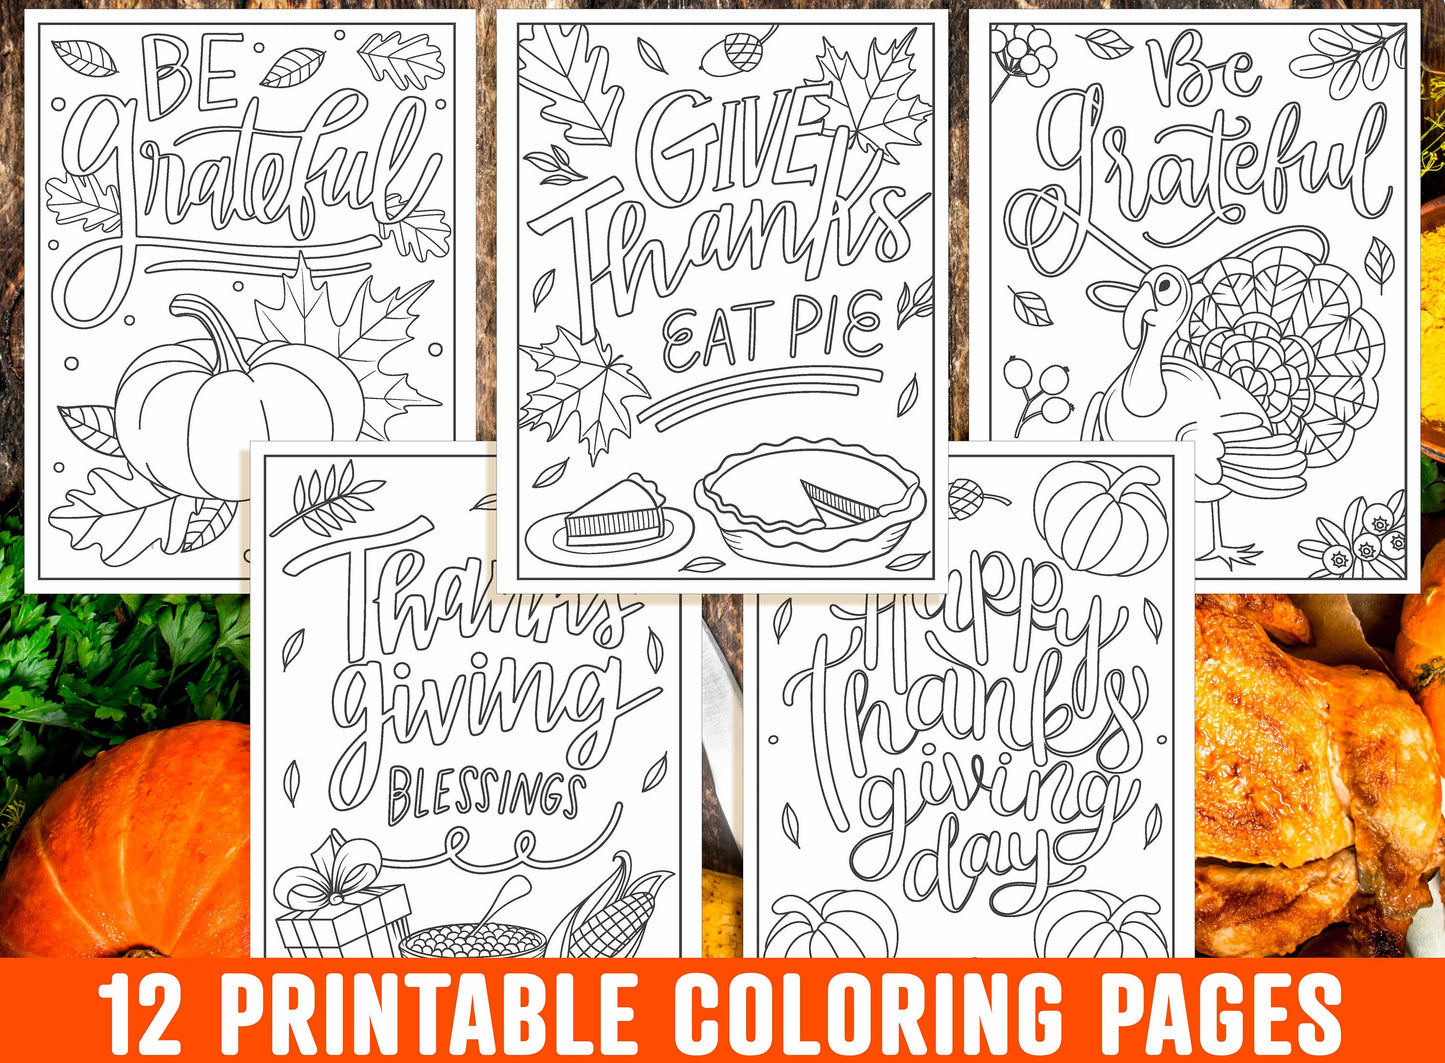 Thanksgiving Coloring Pages, Printable Thanksgiving Coloring Book/Placemat for Kids Boys & Girls Teens Adults, Party Activity, Fall Coloring